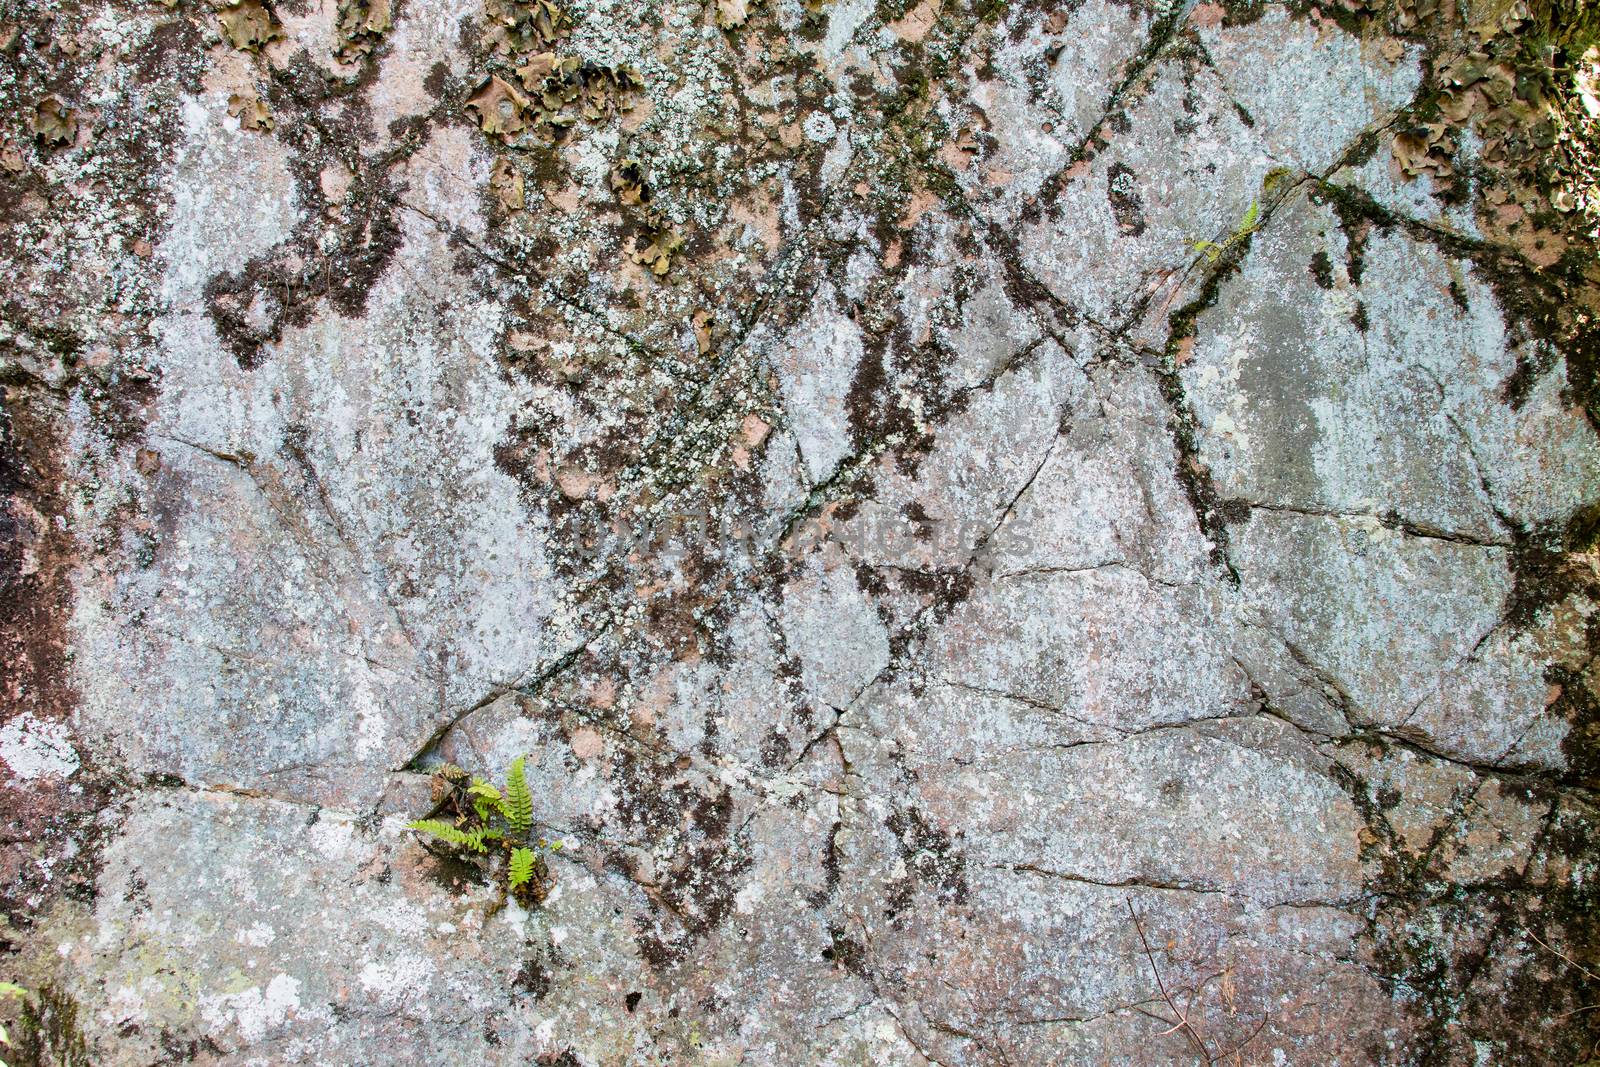  Photo illustration of a fragment of rock with cracks and old moss